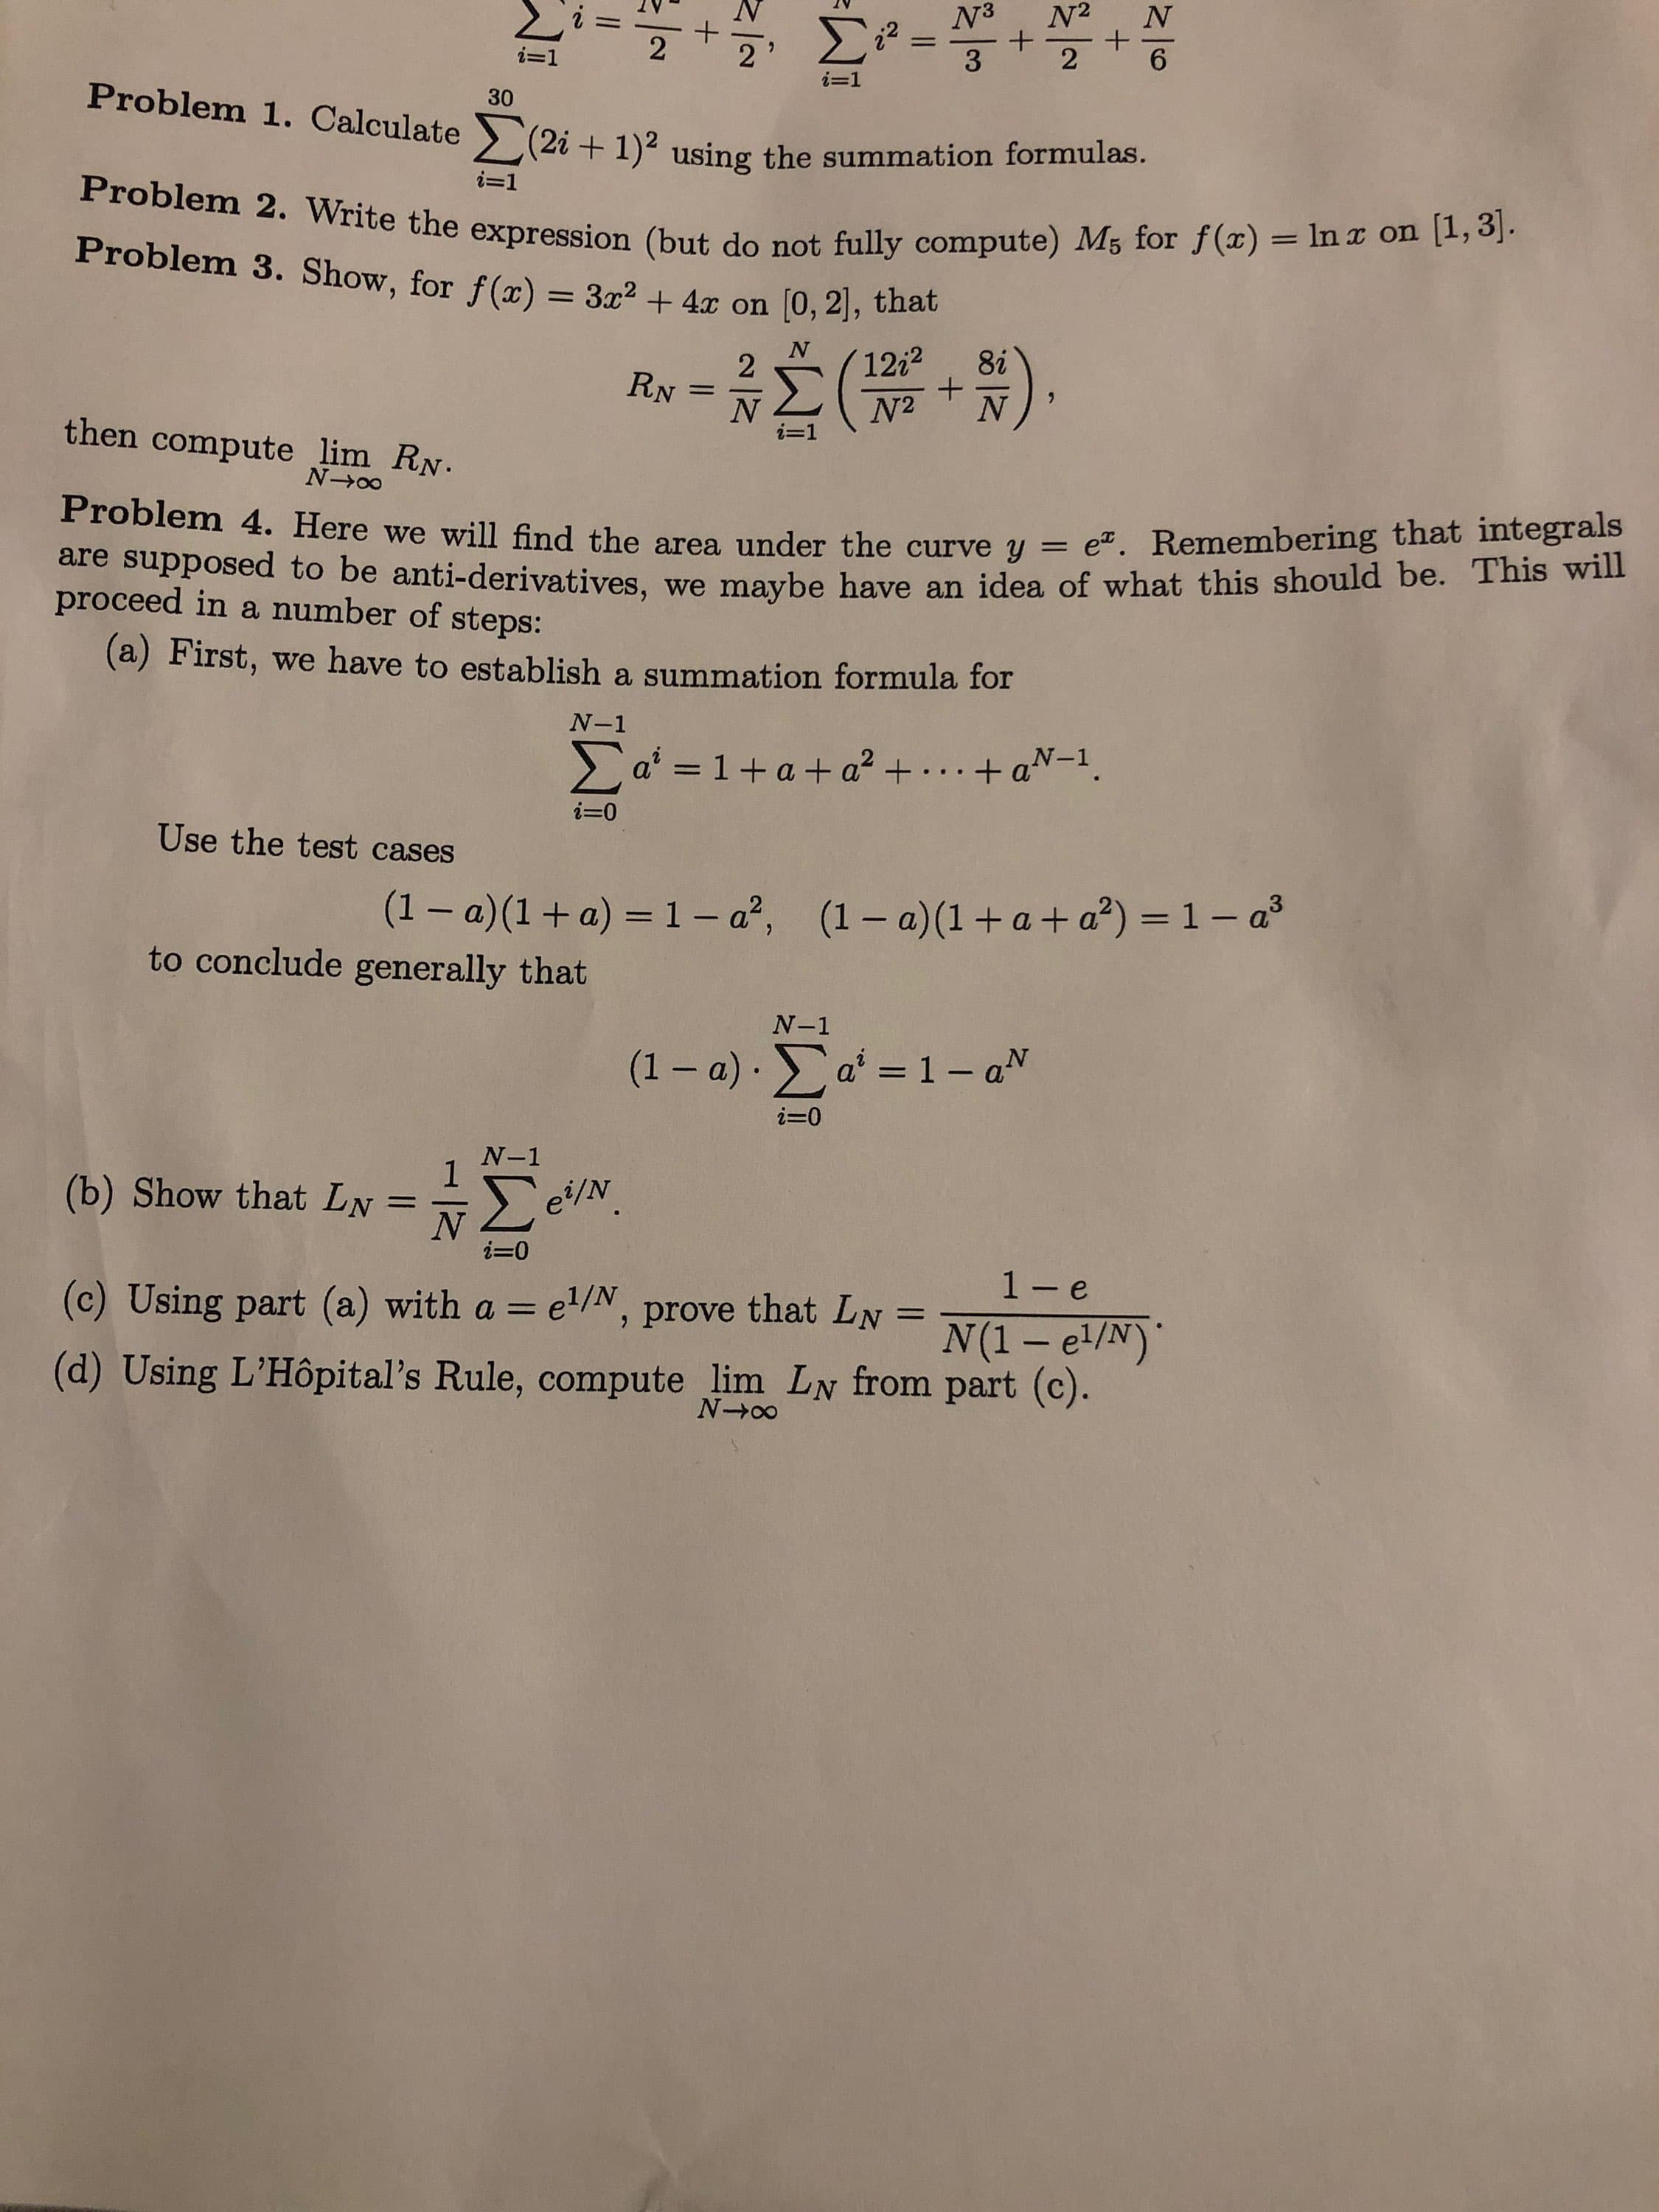 N2
+
2
NA
Σε
1
-
2
6
3
i-1
i-1
Problem 1. Calculate 2i+1) using the summation formulas.
30
i=1
Problem 2. Write the expression (but do not fully compute) M5 for f(x) In x on [1, 3].
Problem 3. Show, for f(x) = 3x2 + 4x on [0, 2], that
έ (W.3)
8i
1212
2
RN
N2
- 1
then
compute lim RN.
N-oo
Problem 4. Here we will find the area under the curve y = e. Remembering that integrals
are supposed to be anti-derivatives, we maybe have an idea of what this should be. This will
proceed in a number of
steps:
(a) First, we have to establish a summation formula for
N-1
1+ a+ a. . + aN-1
a'
i=0
Use the test cases
(1- a)(1+a + a2) = 1 - a3
(1-a)(1+ a) 1- a',
to conclude gener ally that
N-1
1- aN
(1 - a) a
i-0
N-1
(b) Show that LN
ΝΣεν
i 0
1- e
(c) Using part (a) with a = e/, prove that LN
11
(1-e/N)
(d) Using L'Hôpital's Rule, compute lim LN from part (c).
N-o0
+
